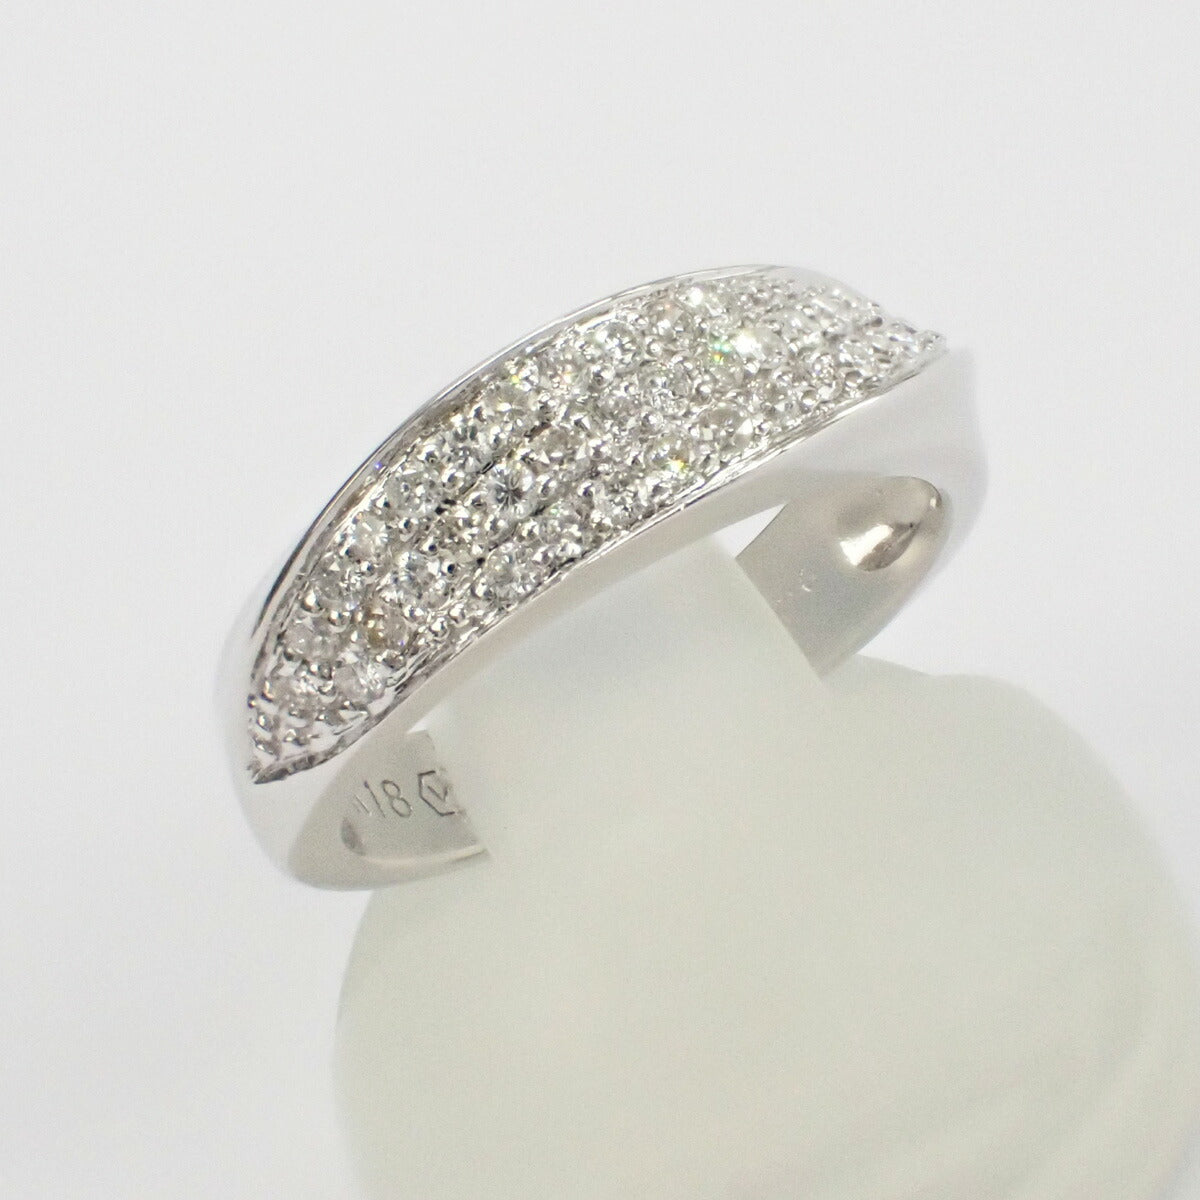 LuxUness  Vendome Aoyama Design Ring with D0.26ct Diamond Set in K18 White Gold Women's Size 7 in Silver  in Excellent condition